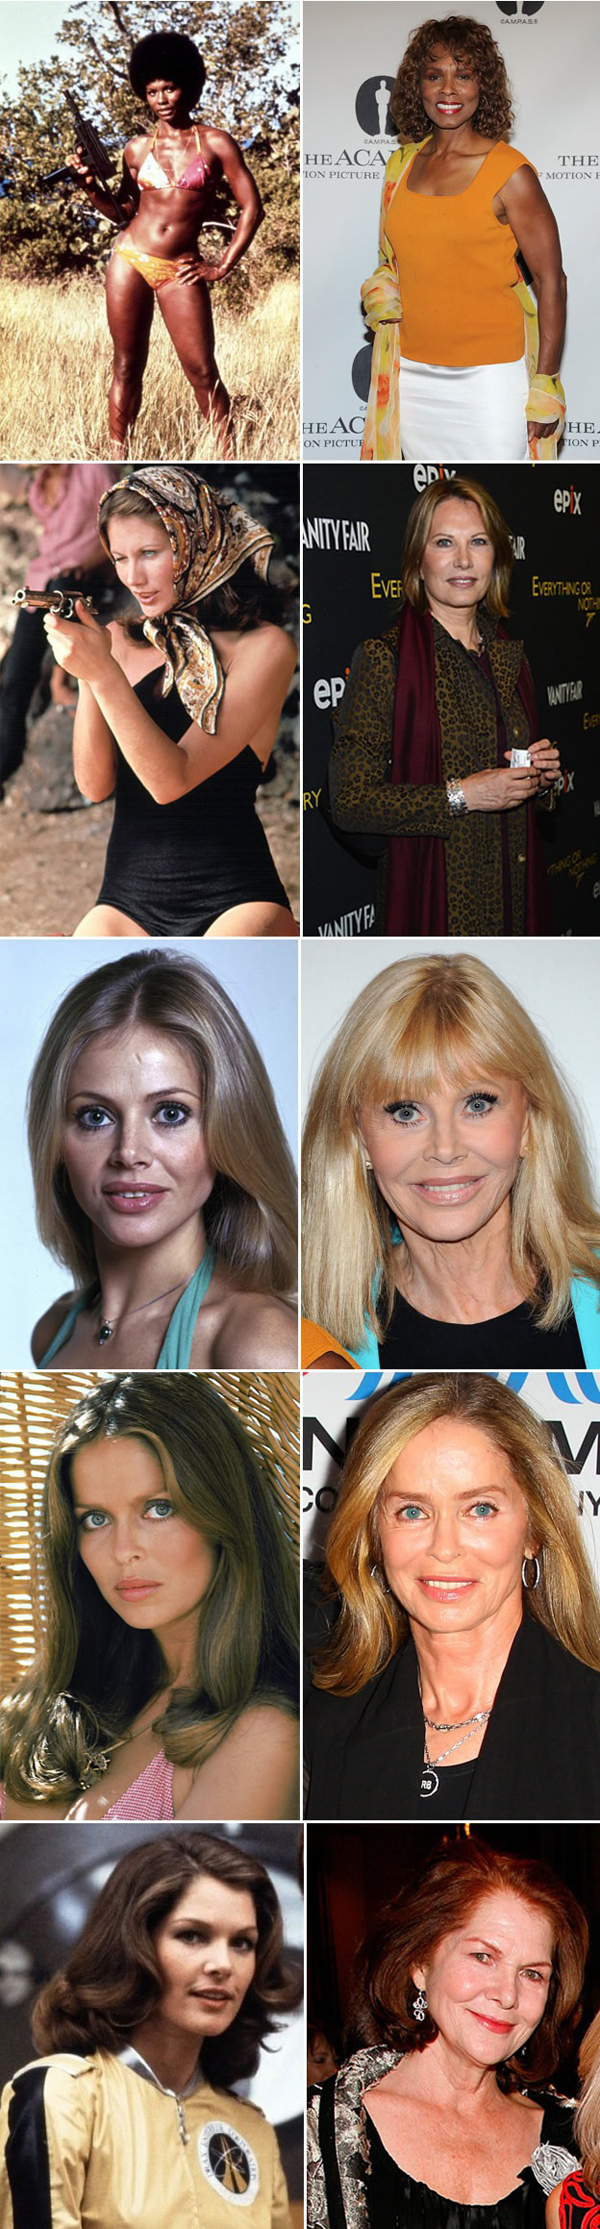 bond girls then and now